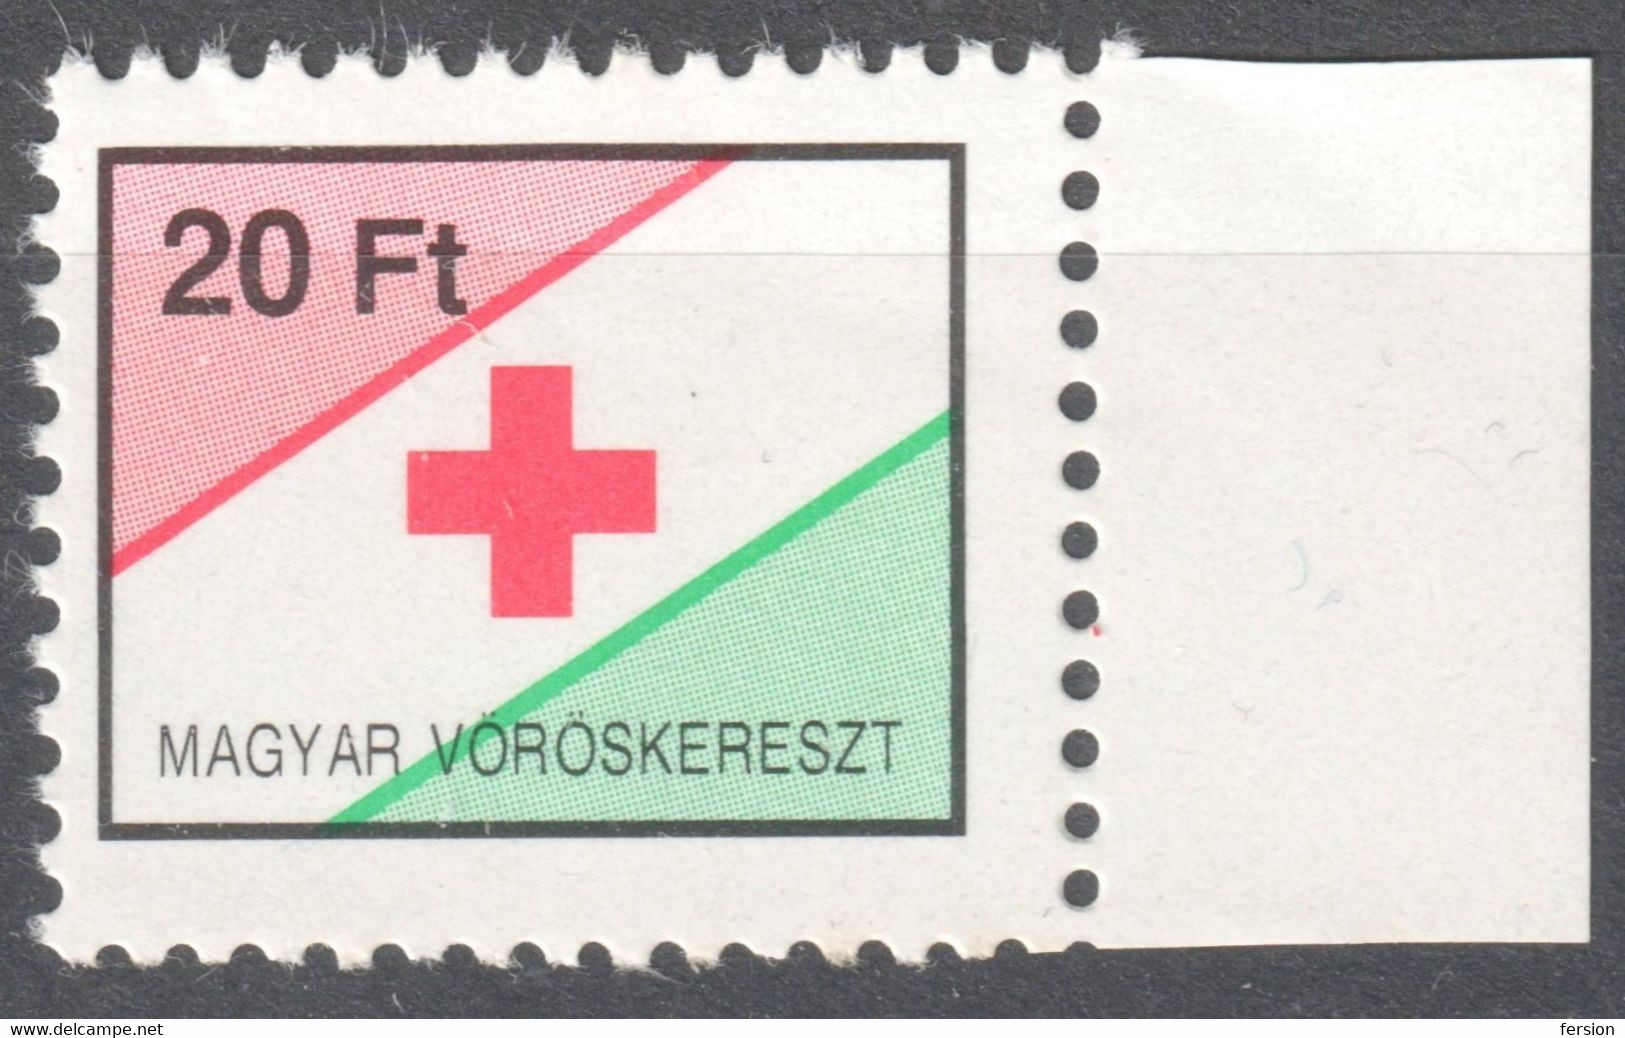 Official Red Cross Rotes Kreuz Croix Rouge Member Tax Stamp 20 Ft 1990 Hungary Ungarn Hongrie - Fiscales